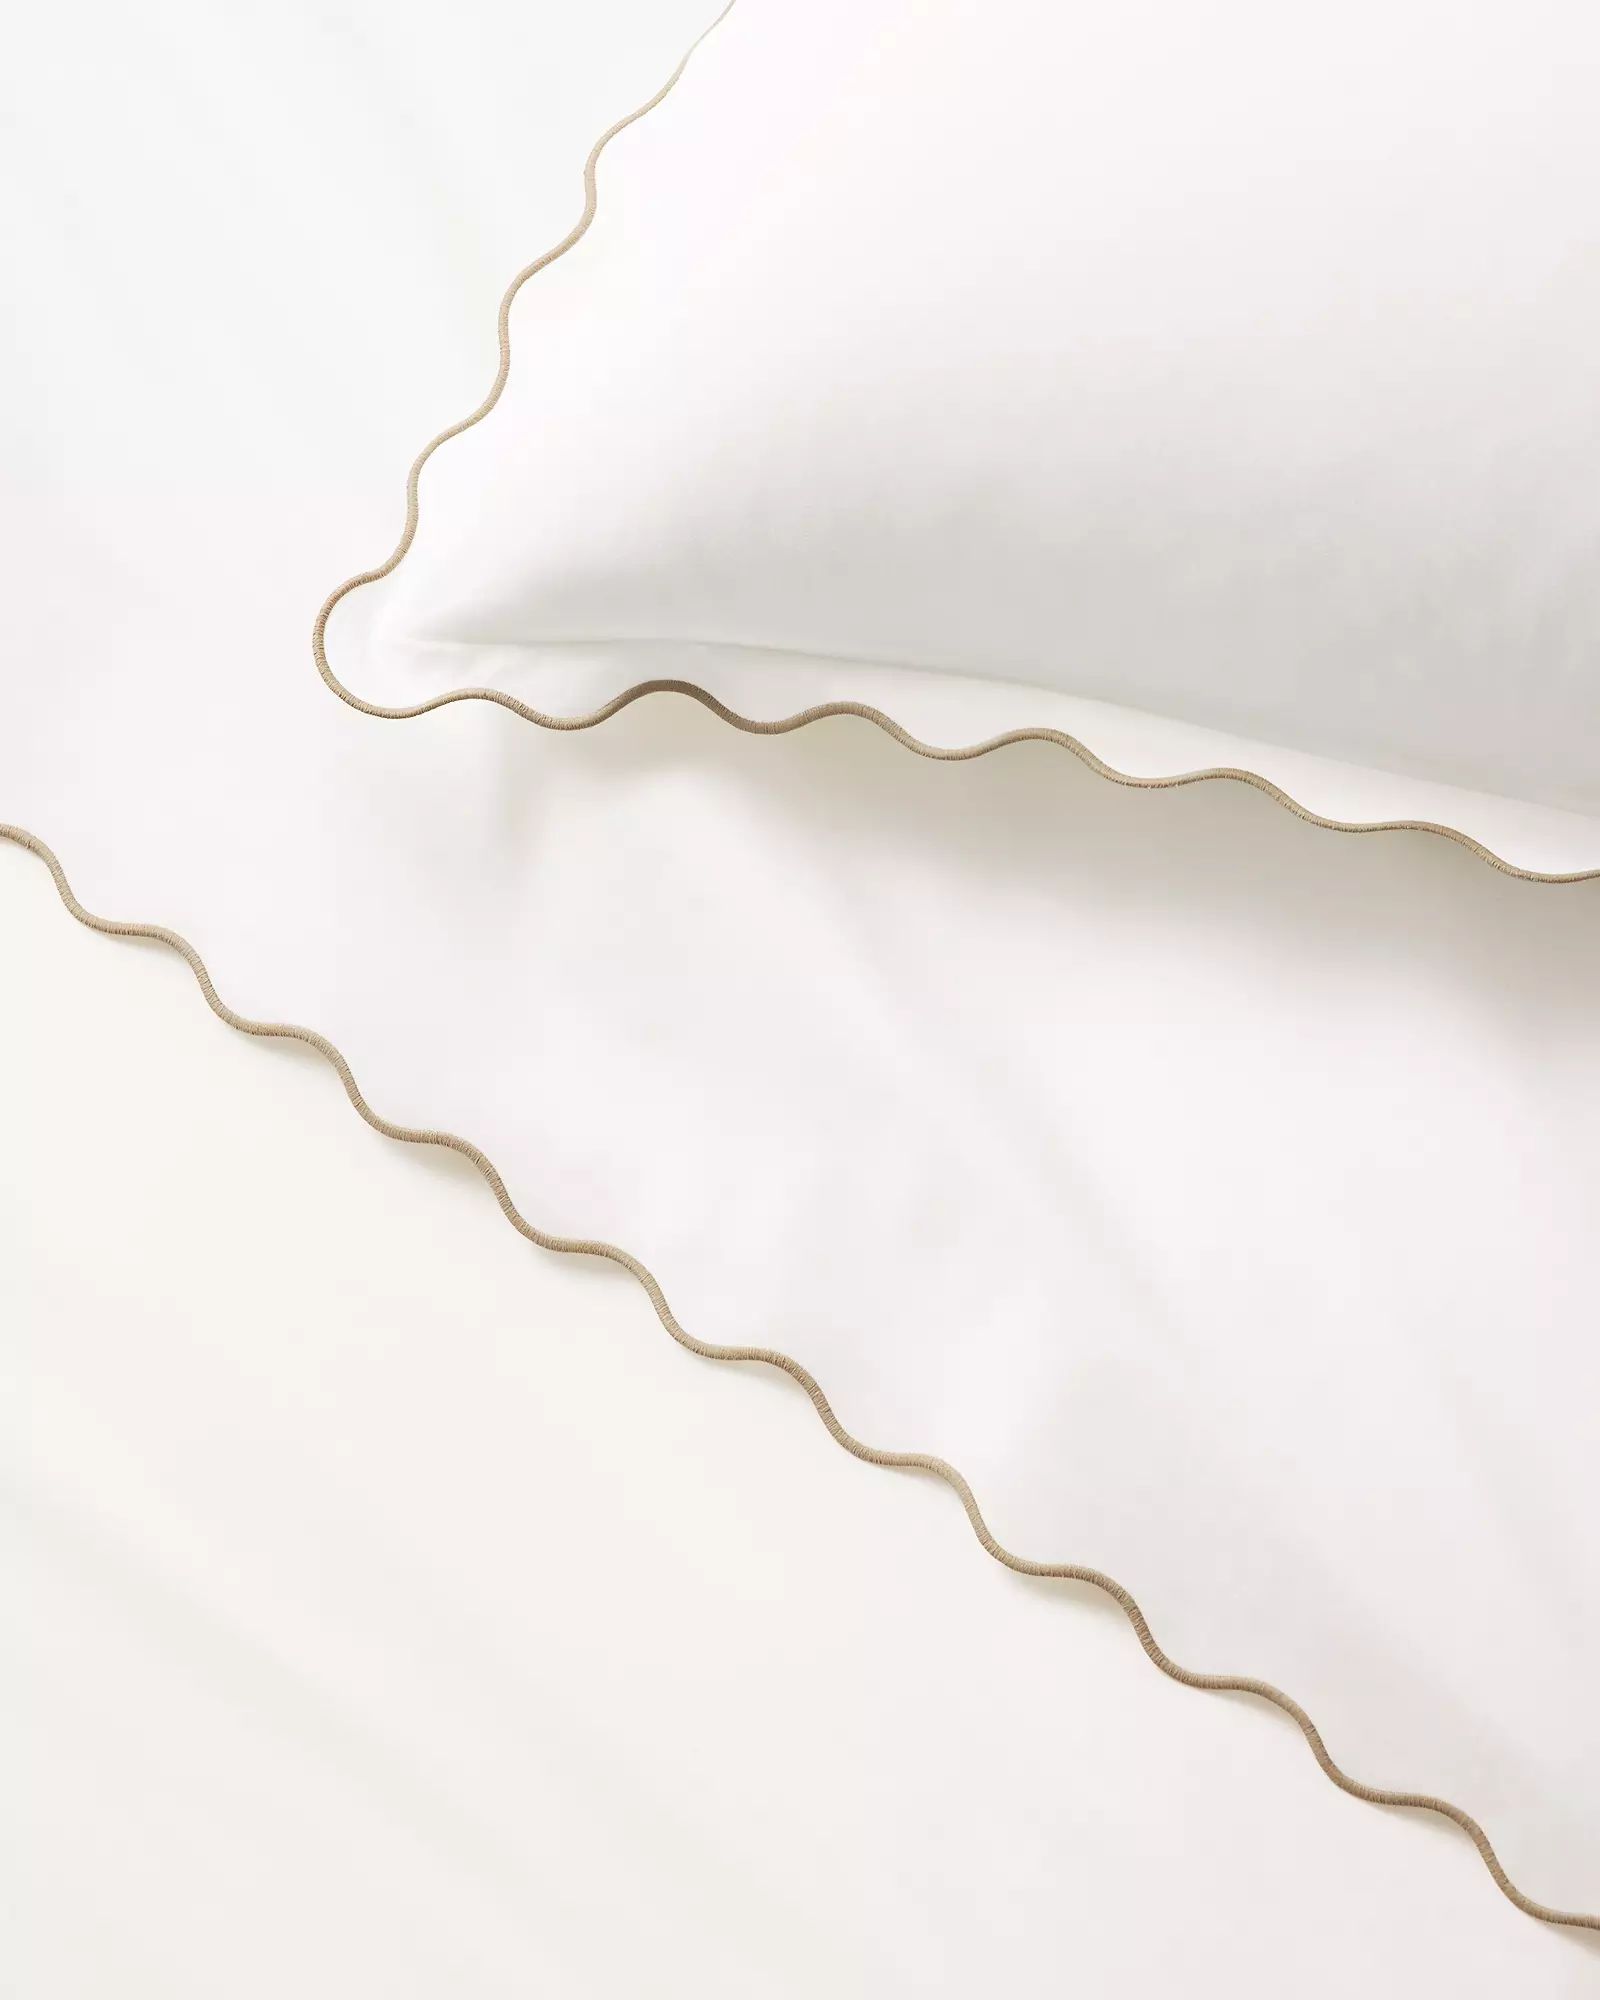 Wave Percale Duvet Cover | Serena and Lily